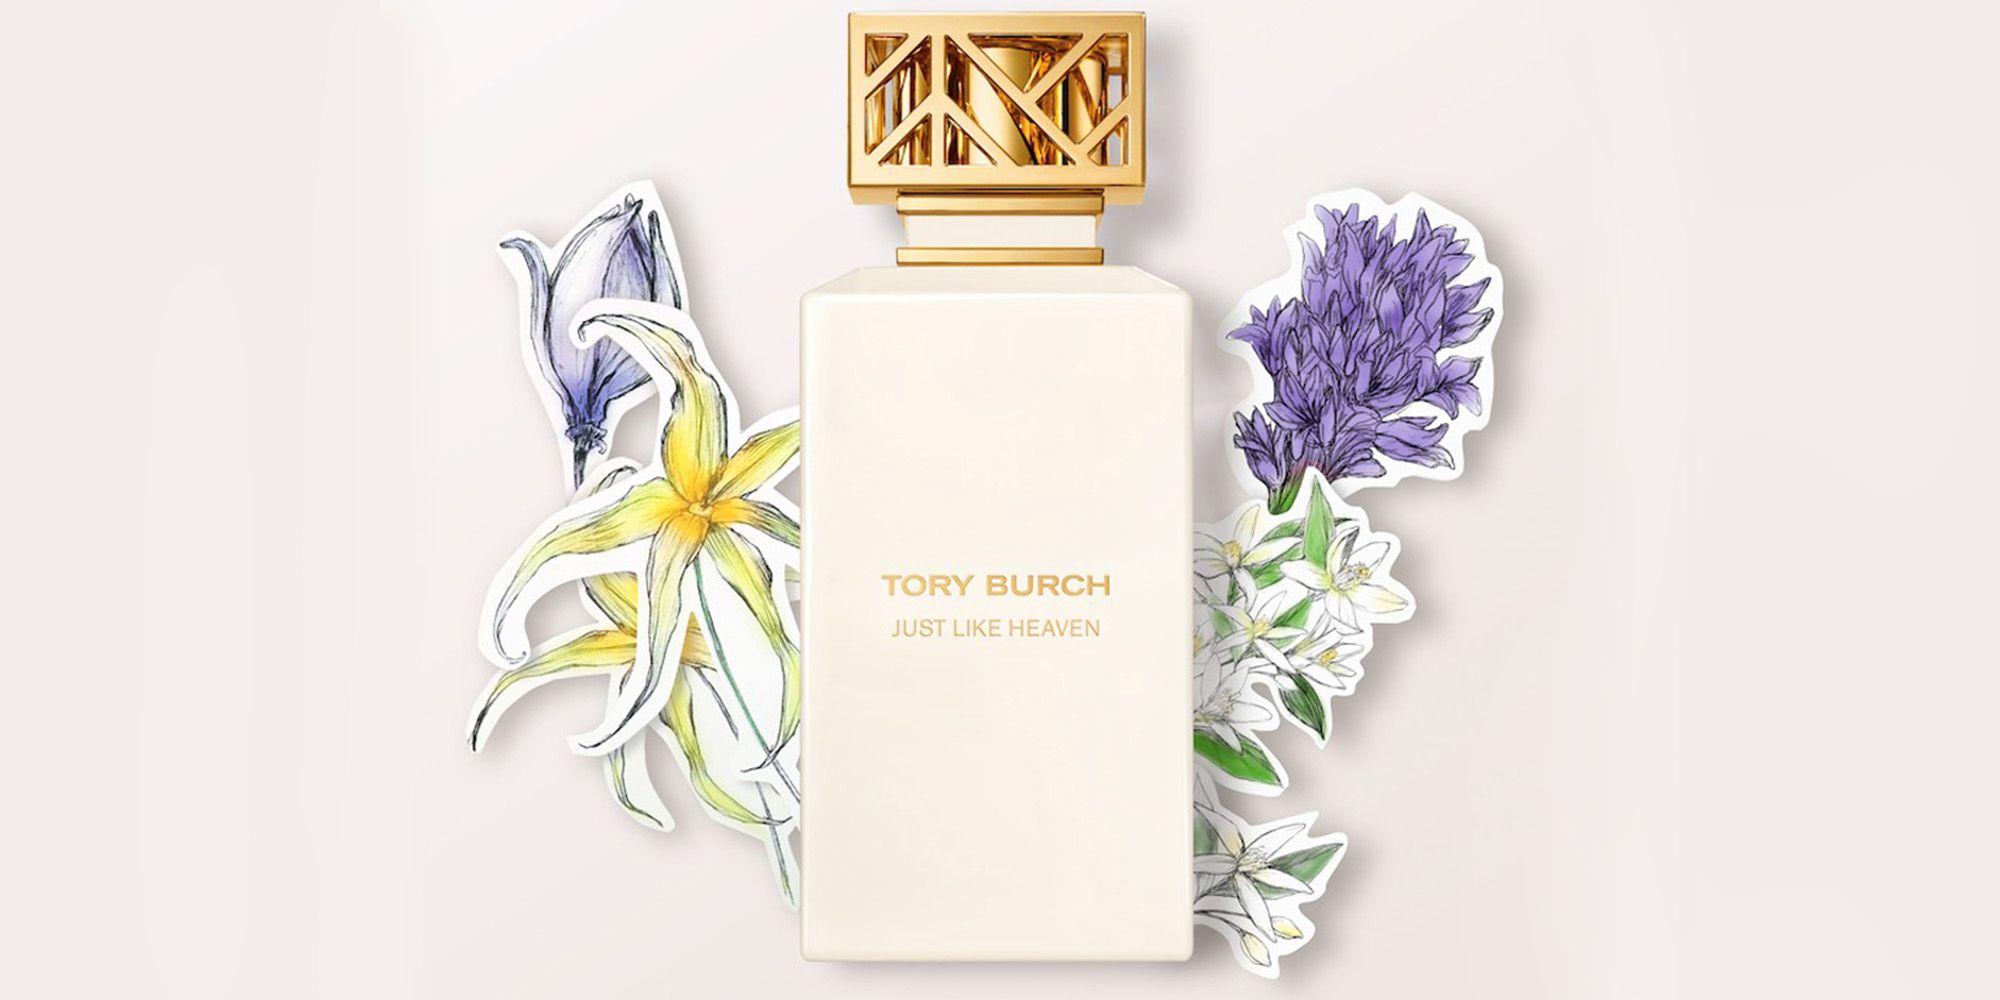 Tory Burch Just Like Heaven Interview - Tory Burch Perfume Interview